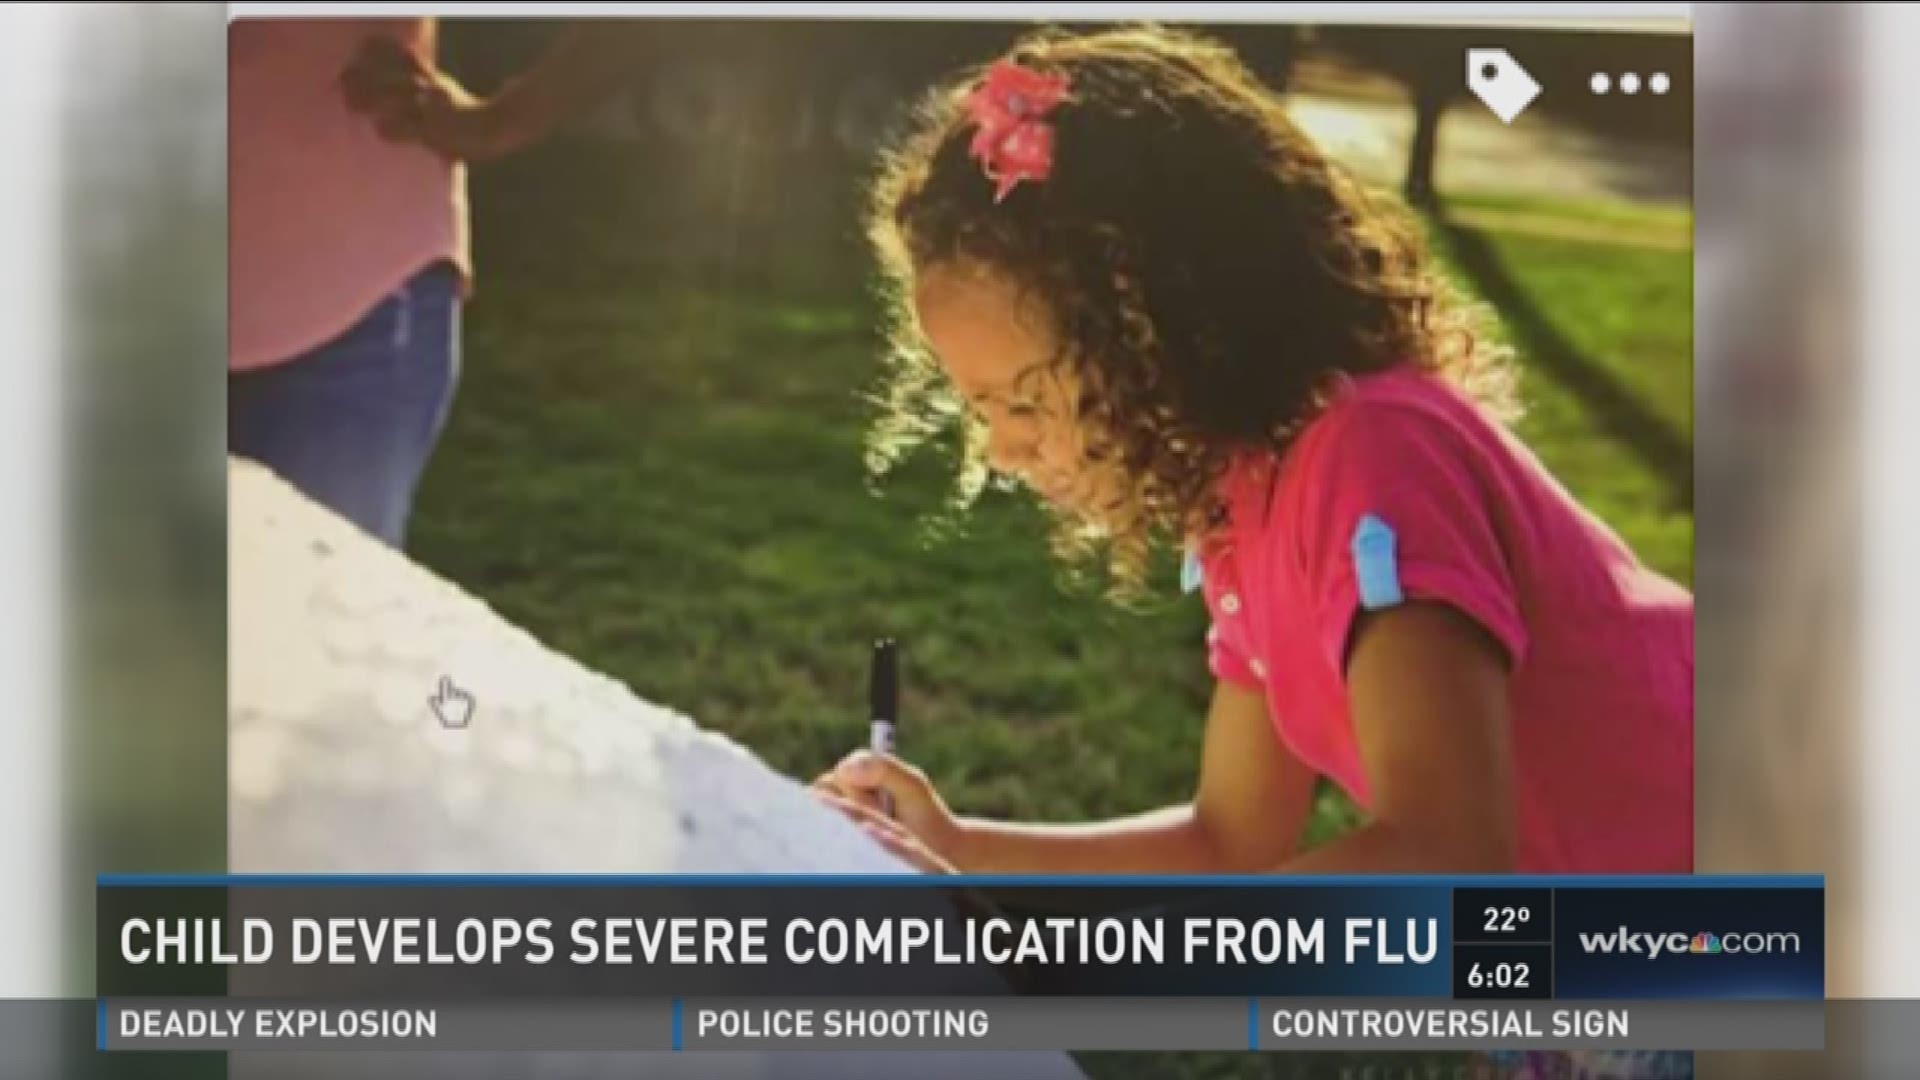 Child develops severe complication from flu